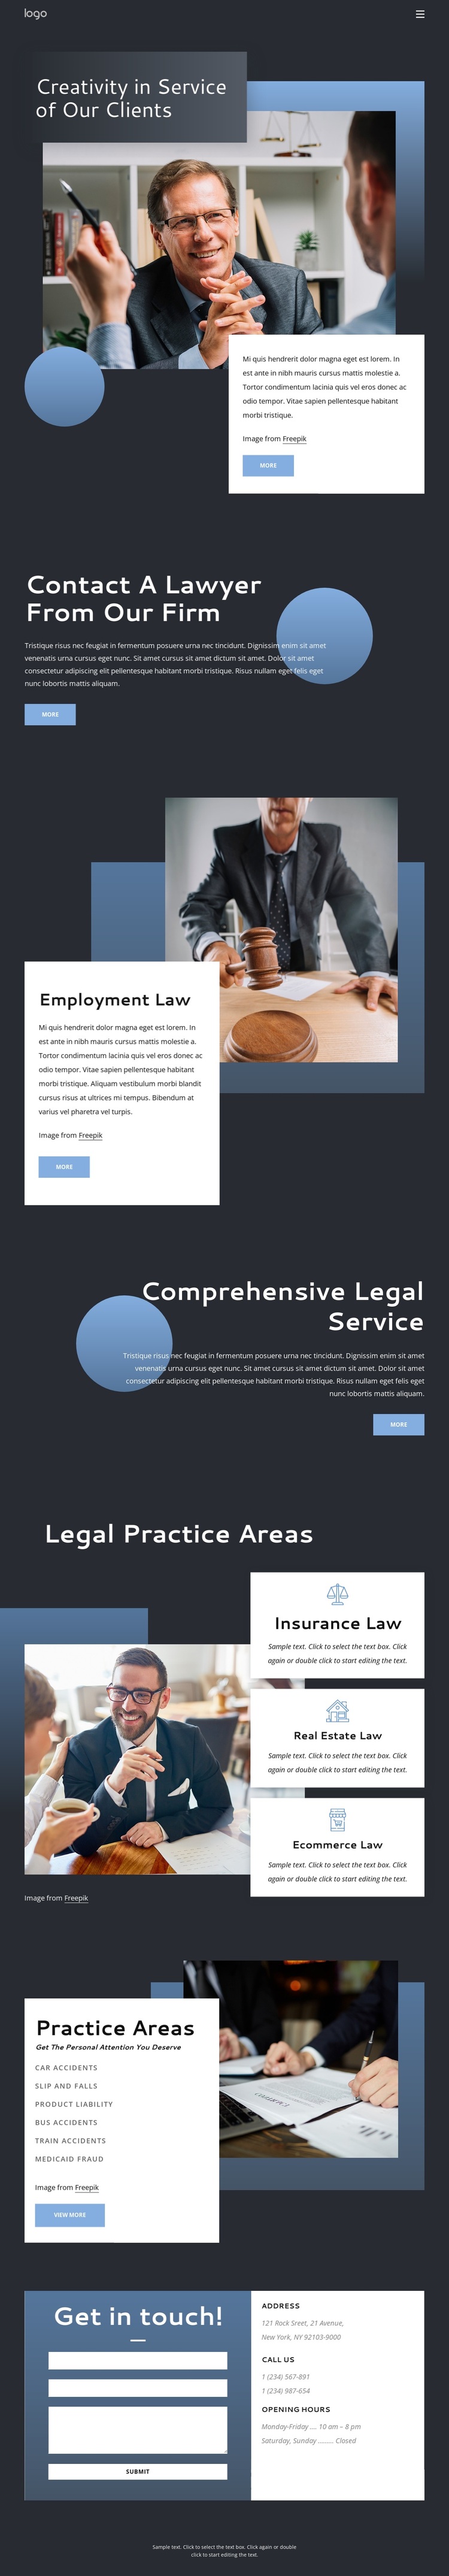 Experienced legal advice Joomla Page Builder